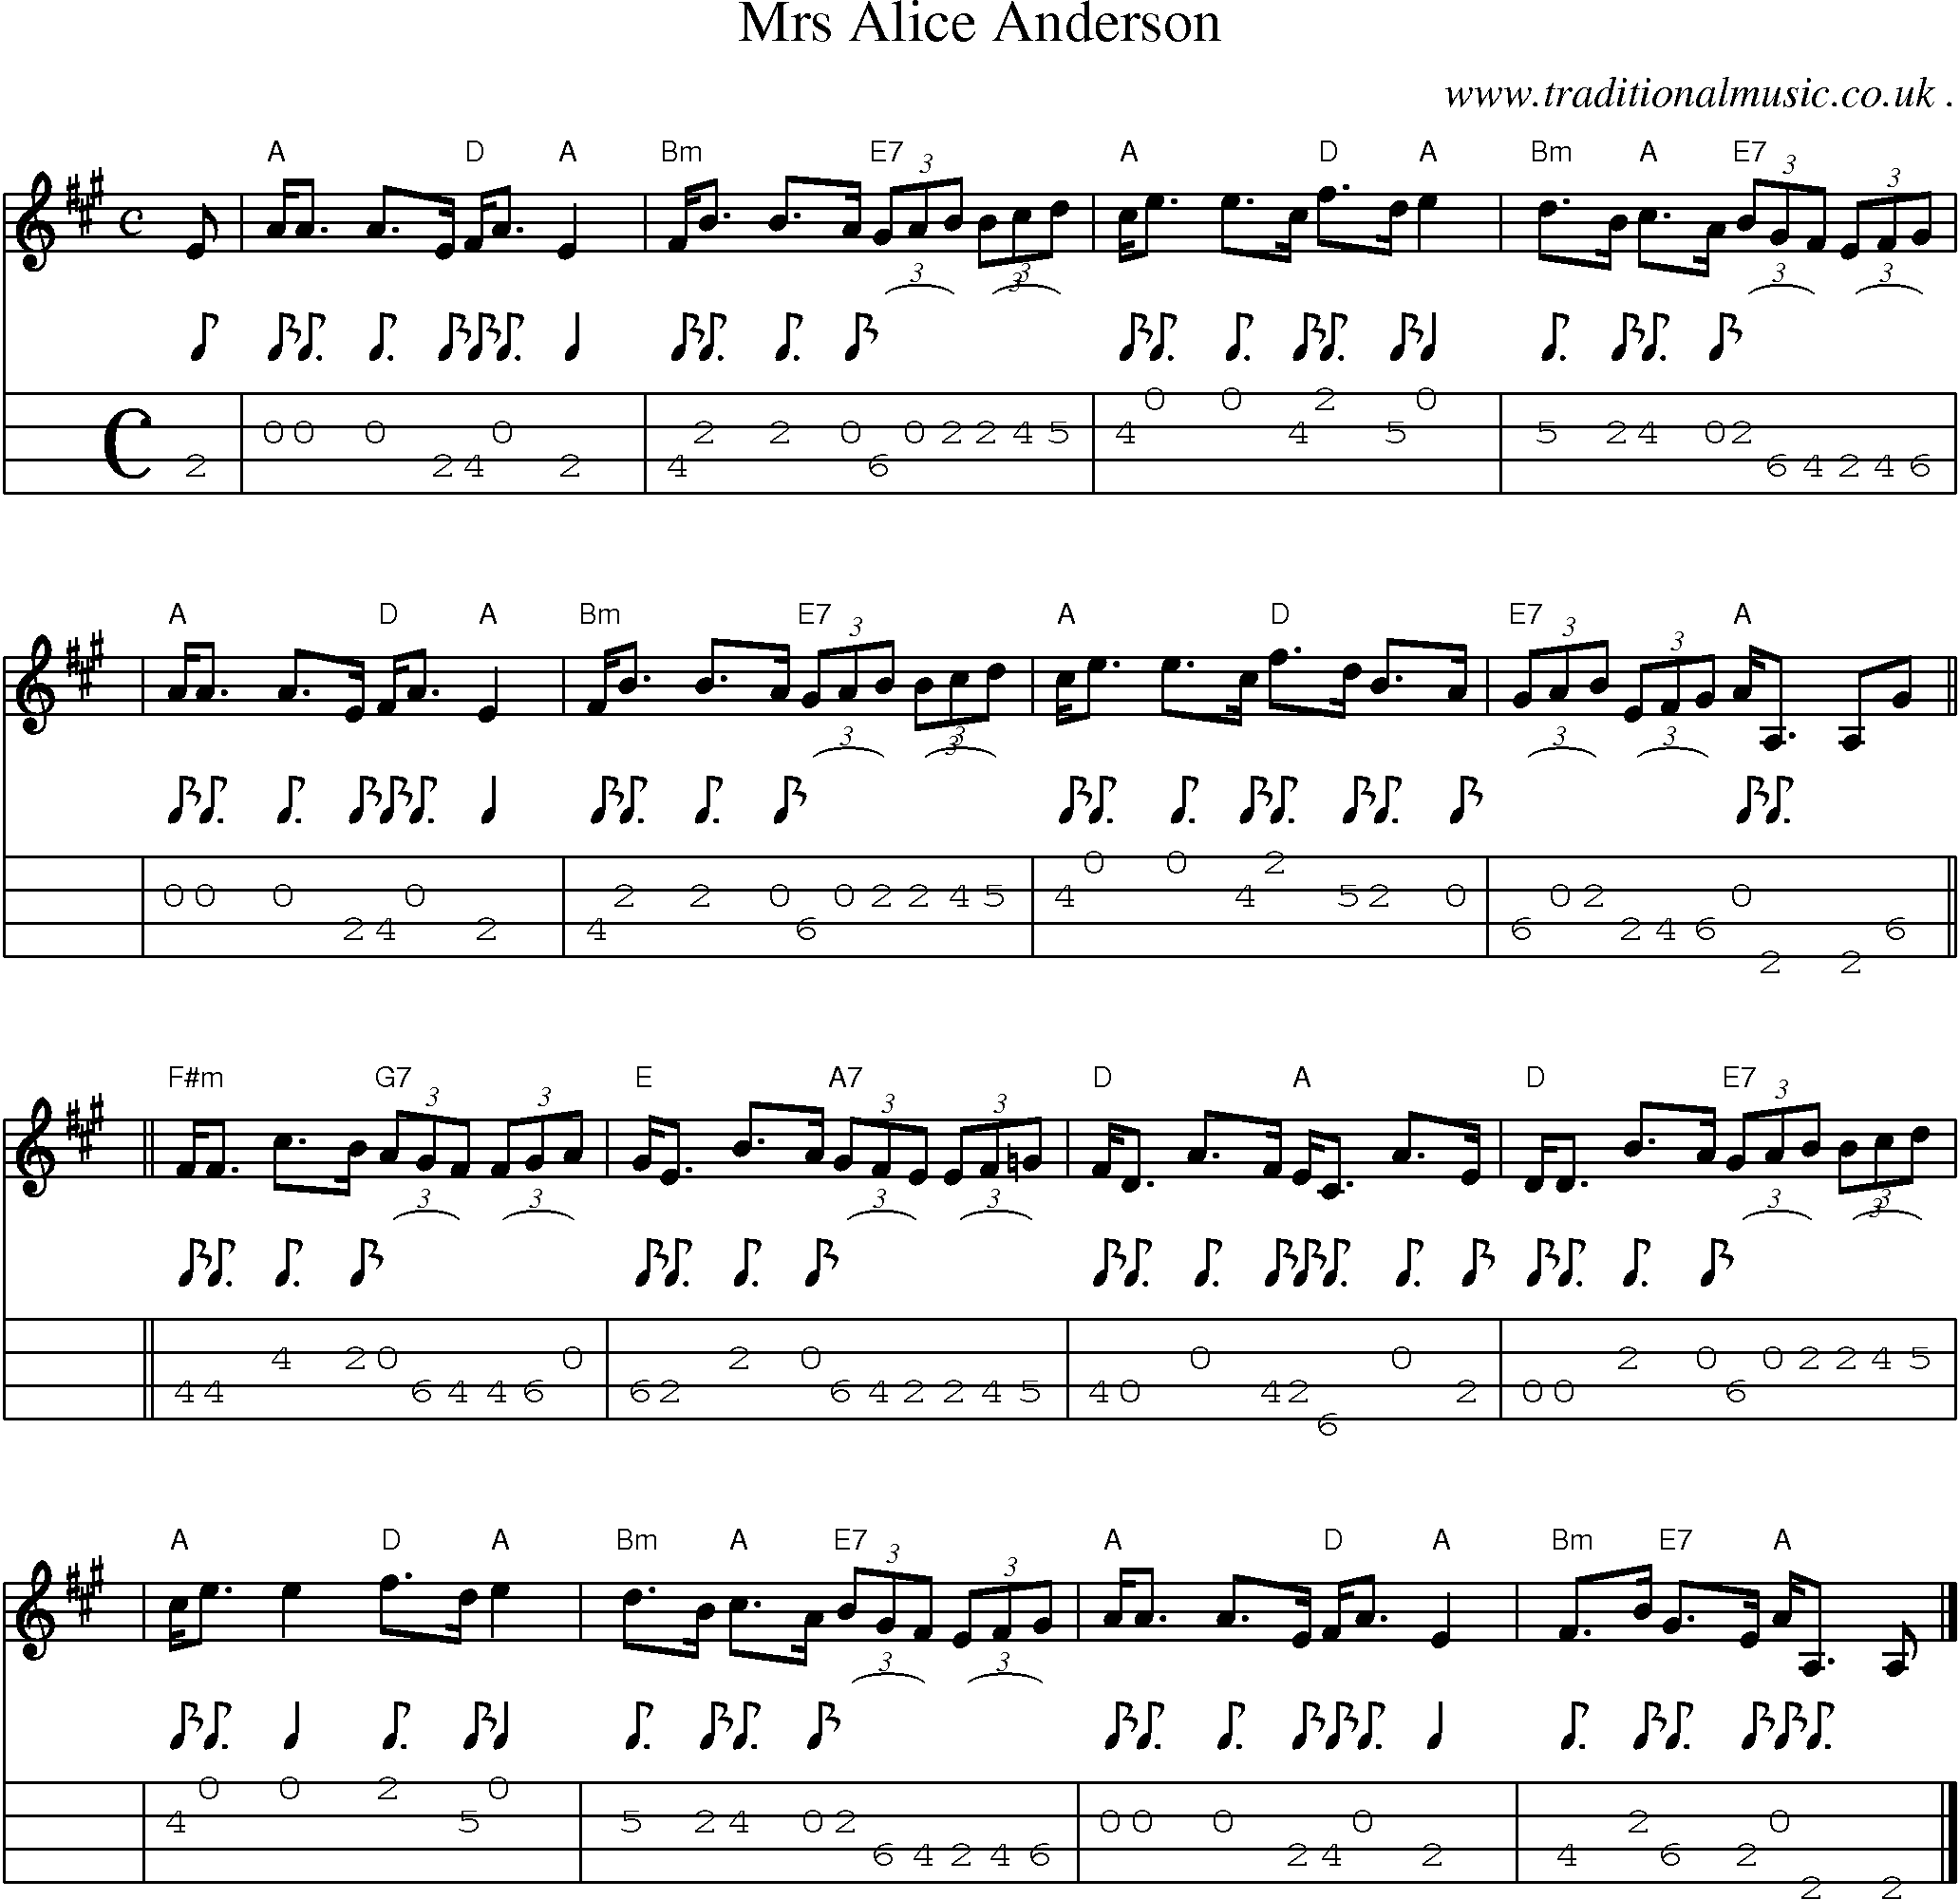 Sheet-music  score, Chords and Mandolin Tabs for Mrs Alice Anderson